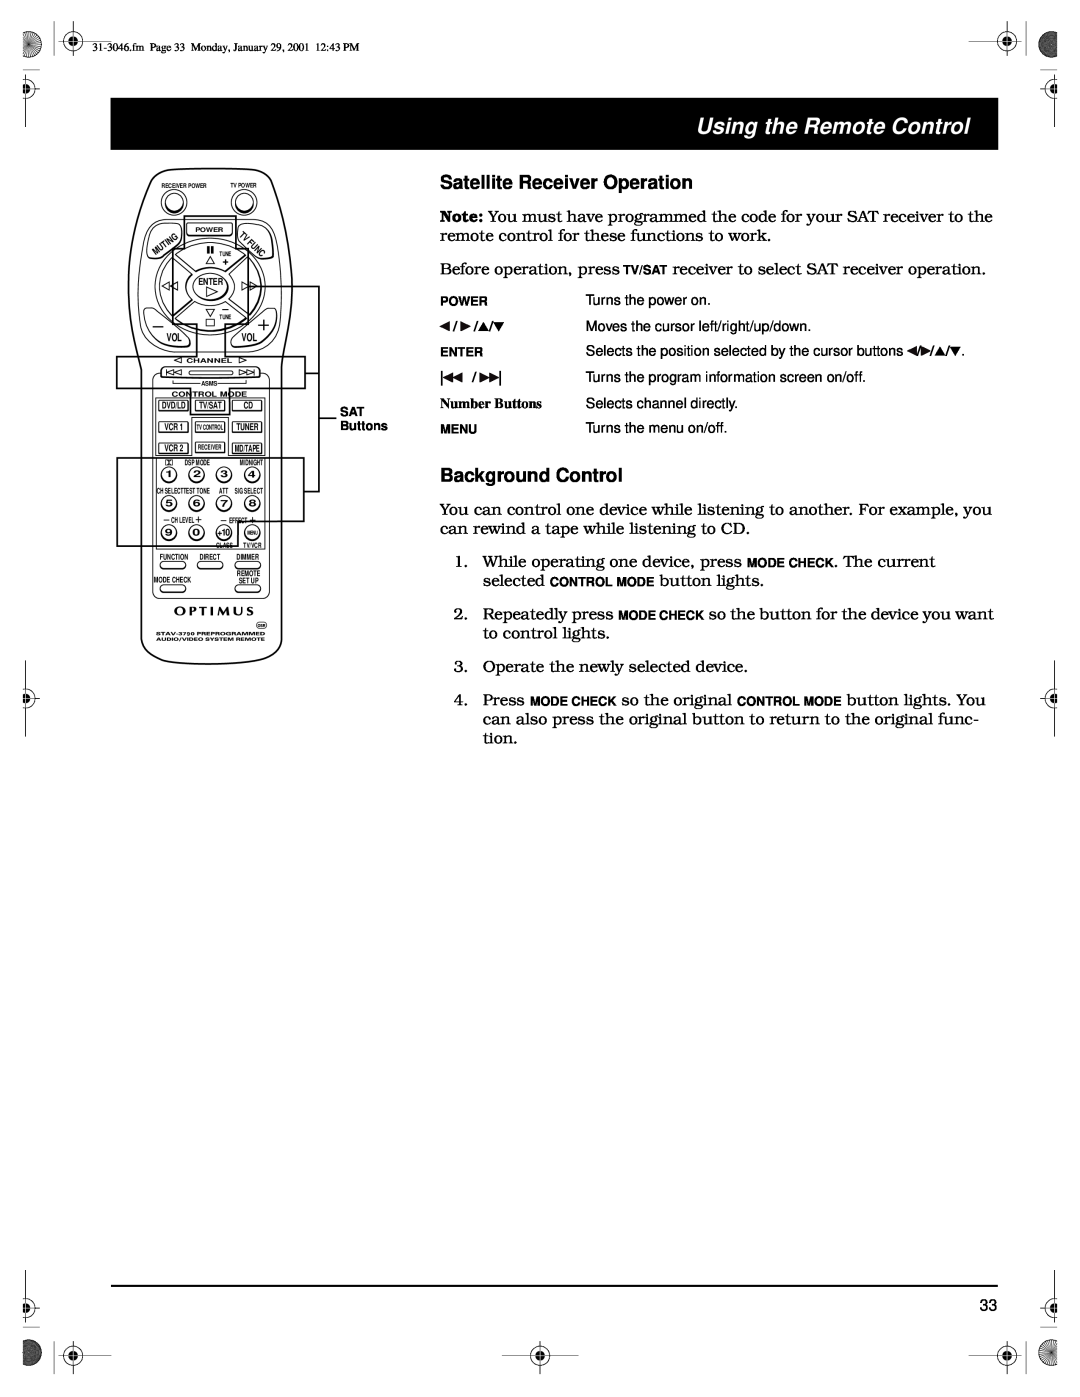 Optimus STAV-3790 owner manual Satellite Receiver Operation, Background Control, Using the Remote Control 